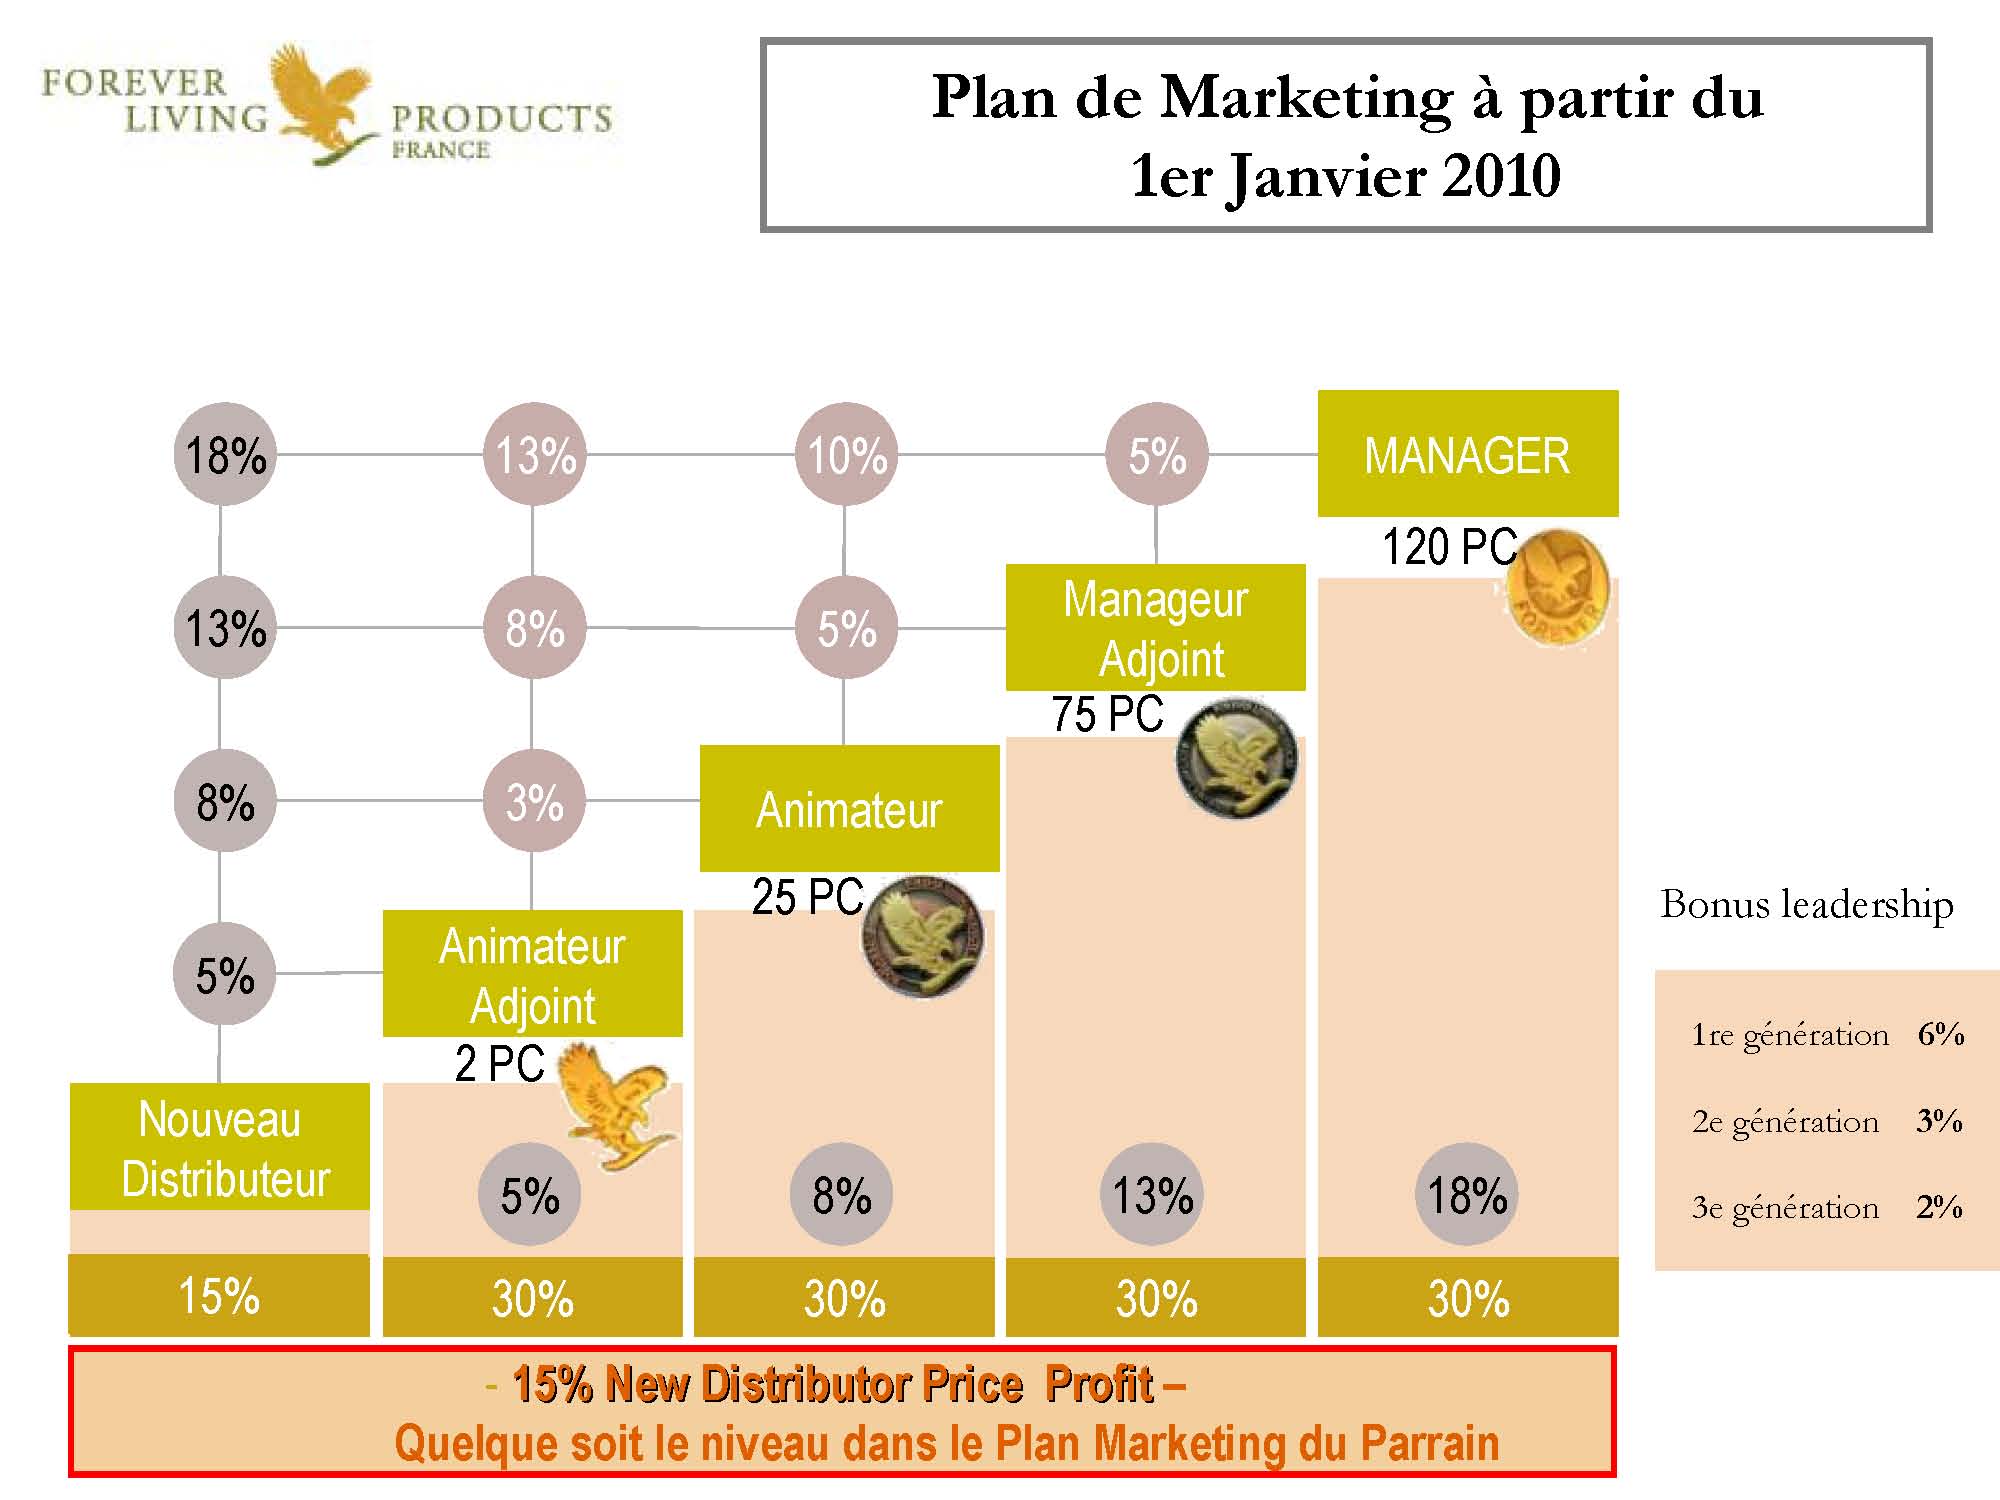 forever living product business plan